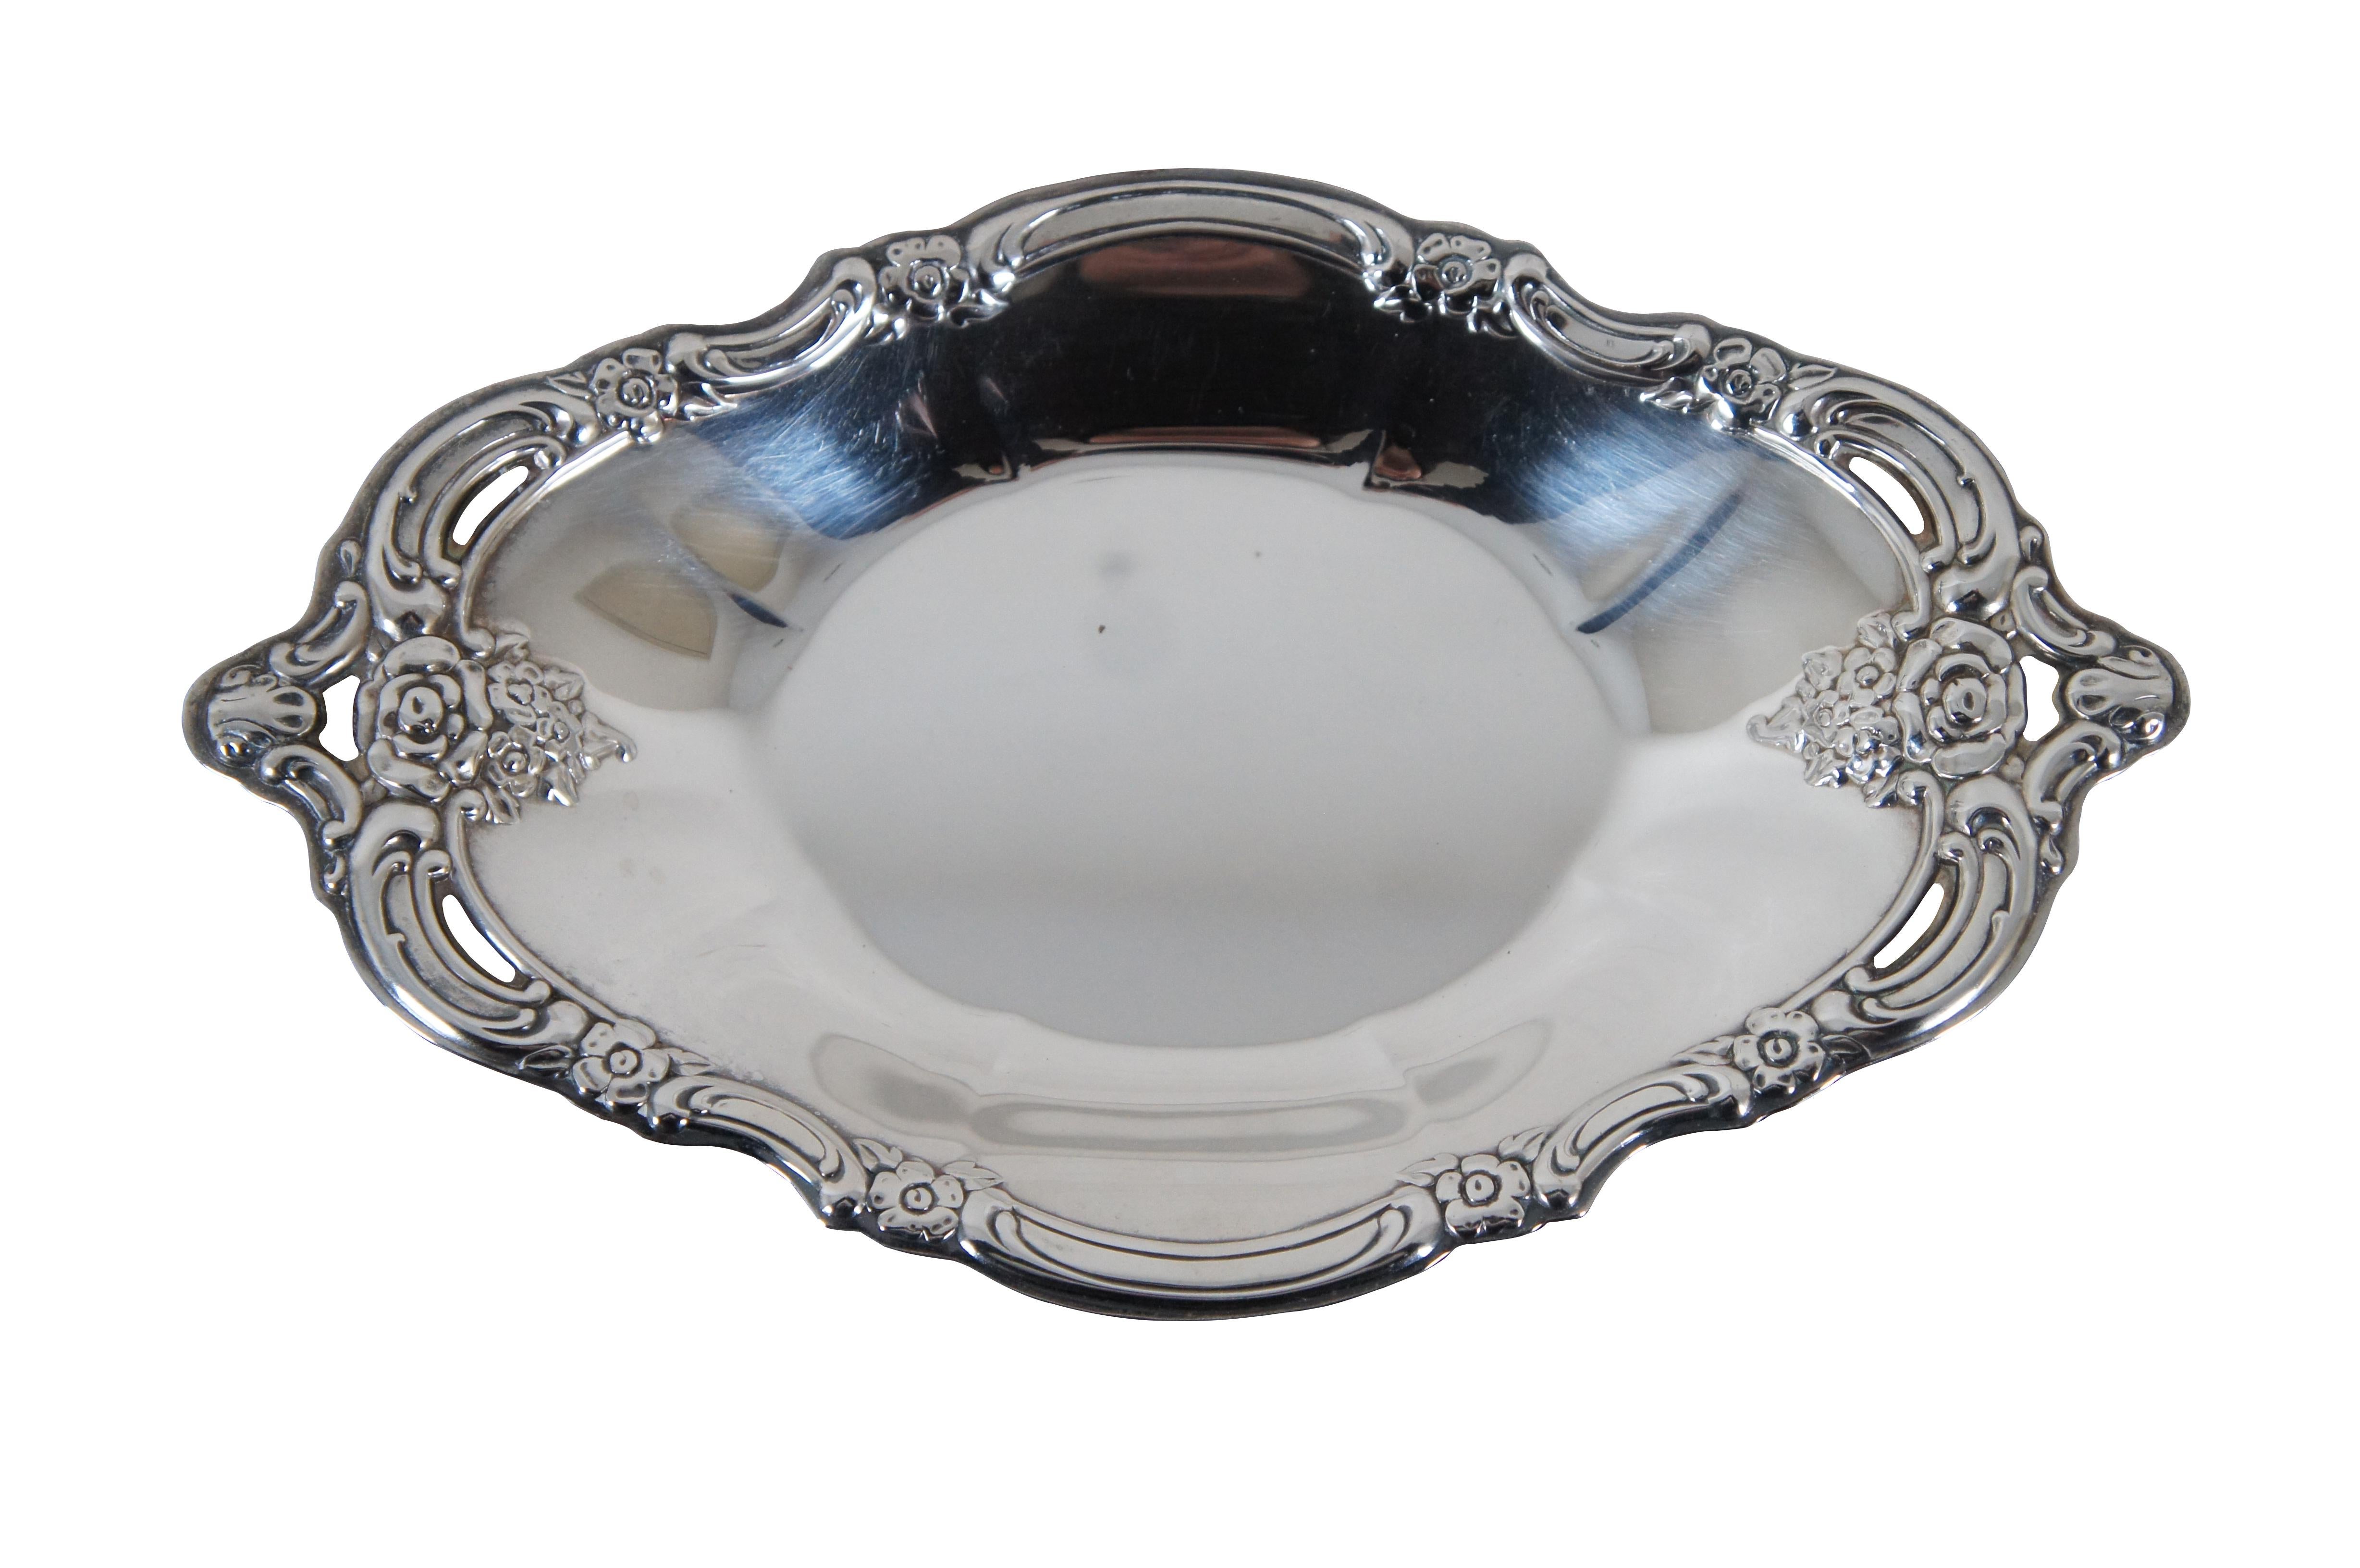 Baroque 2 Community Silverplate Oneida Silver Artistry Oval Serving Bowl Dish 9